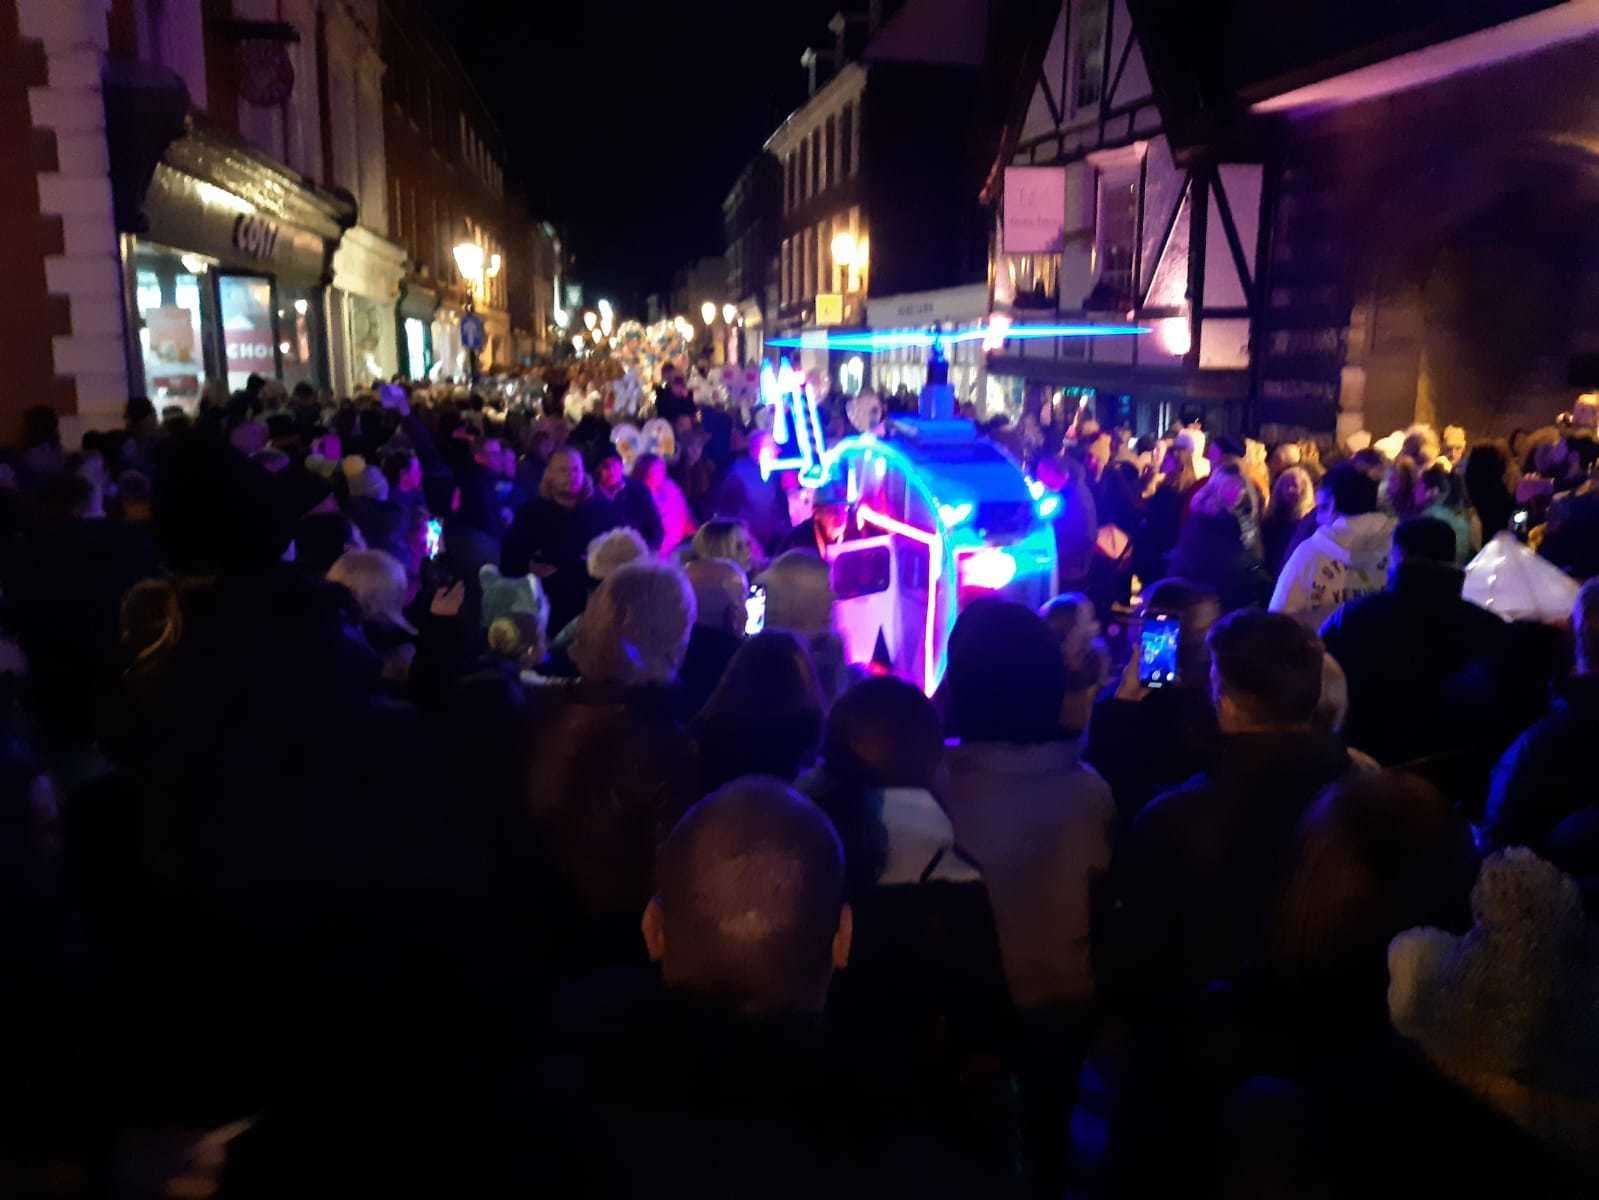 Medway Light Nights was held across two days in Rochester